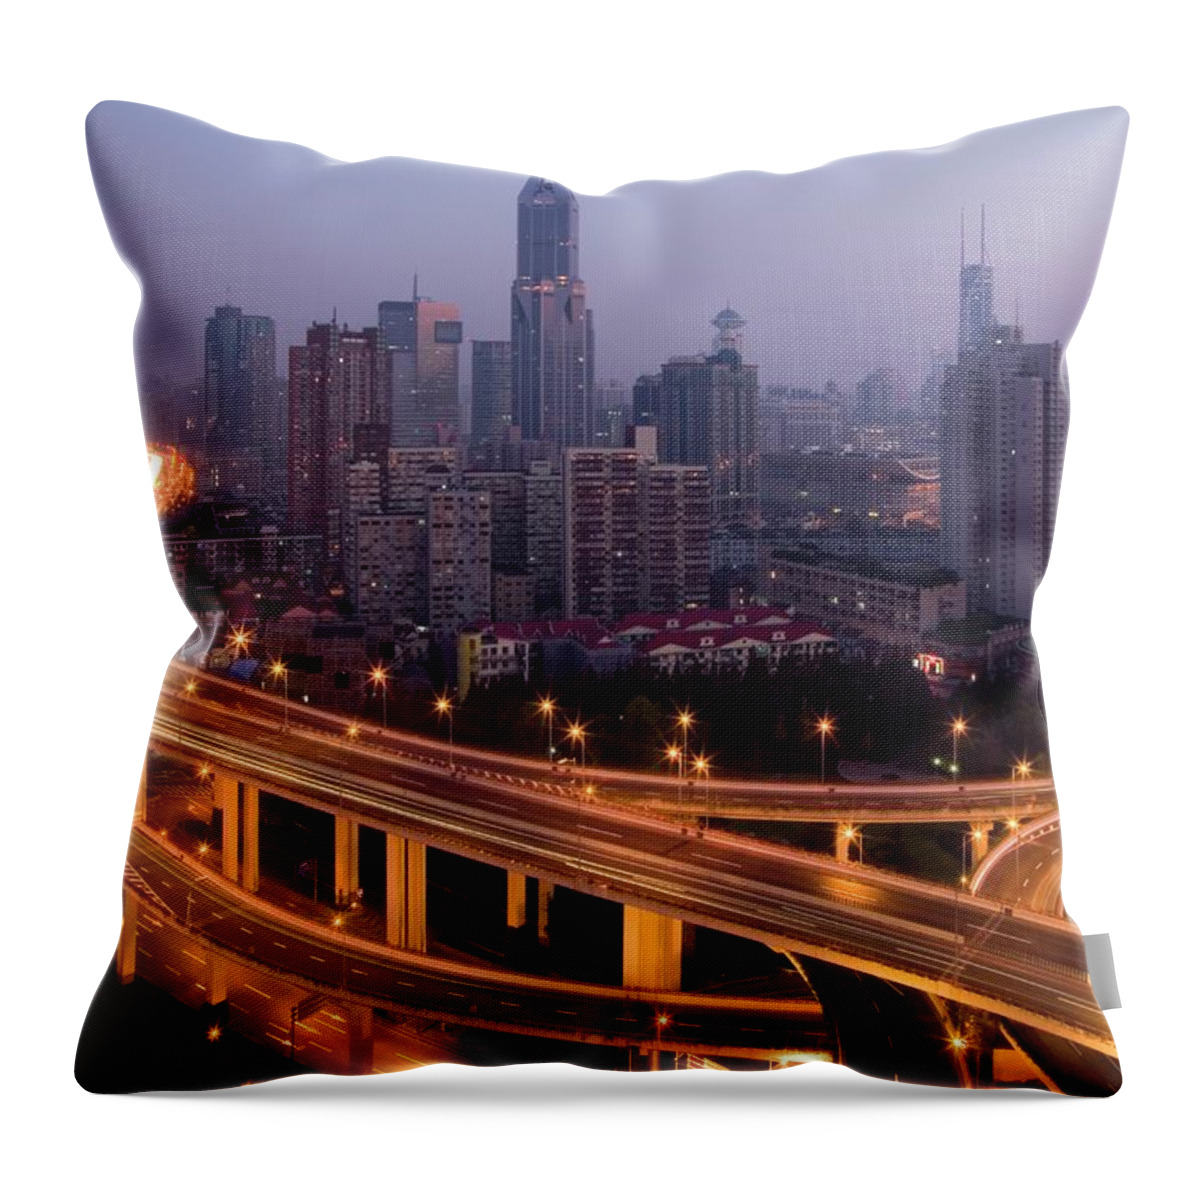 Chinese Culture Throw Pillow featuring the photograph Light Trails On Highway by Leniners